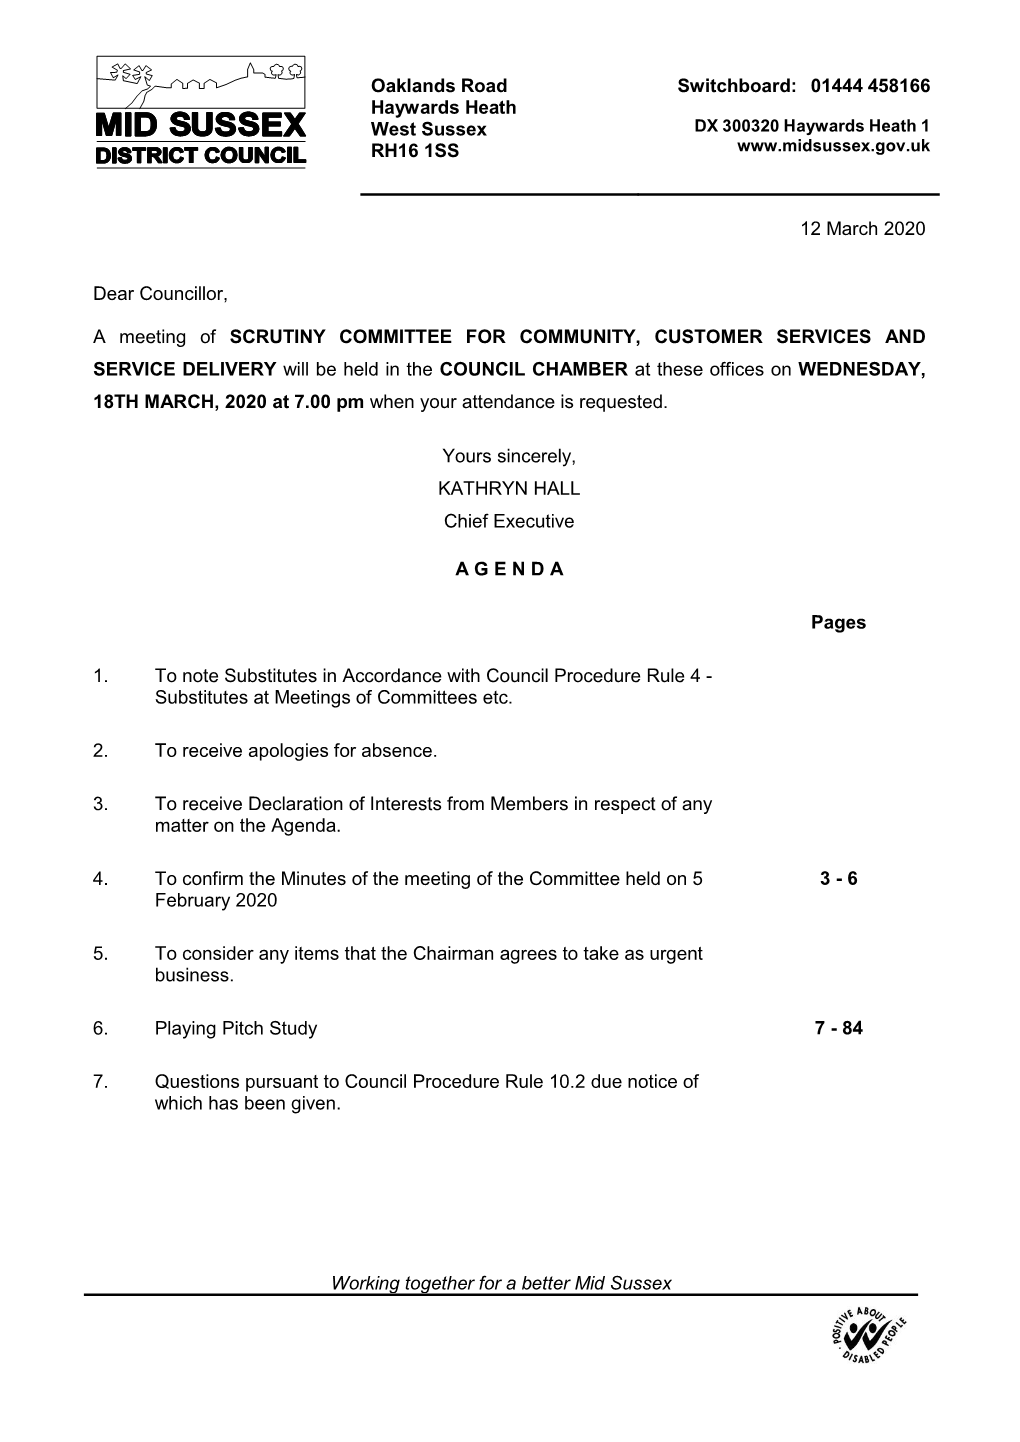 (Public Pack)Agenda Document for Scrutiny Committee for Community